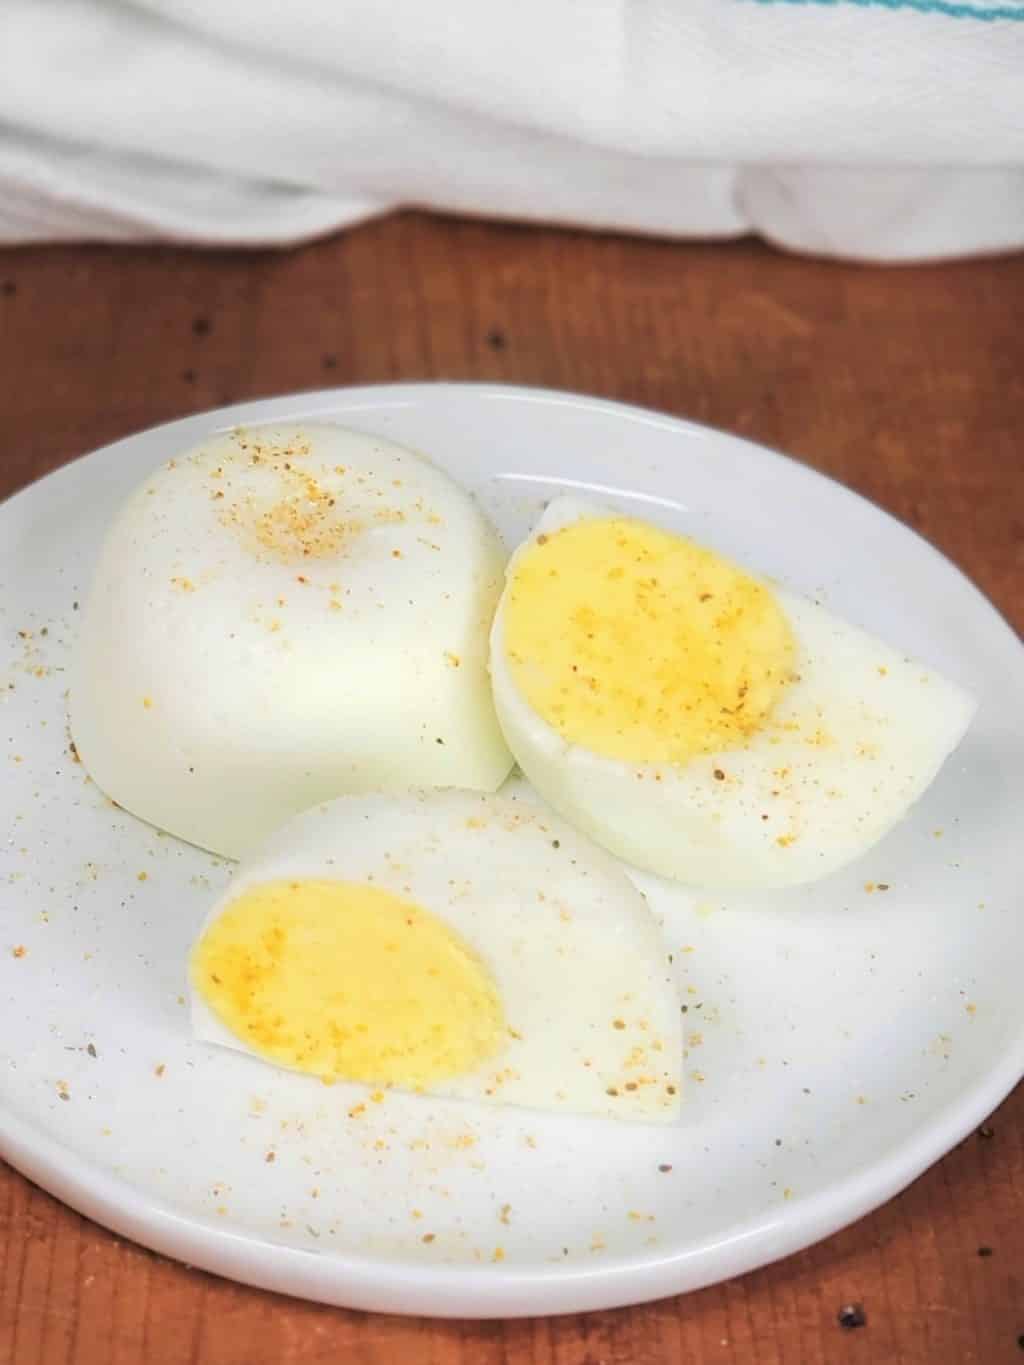 Hard boiled eggs on a white plate.